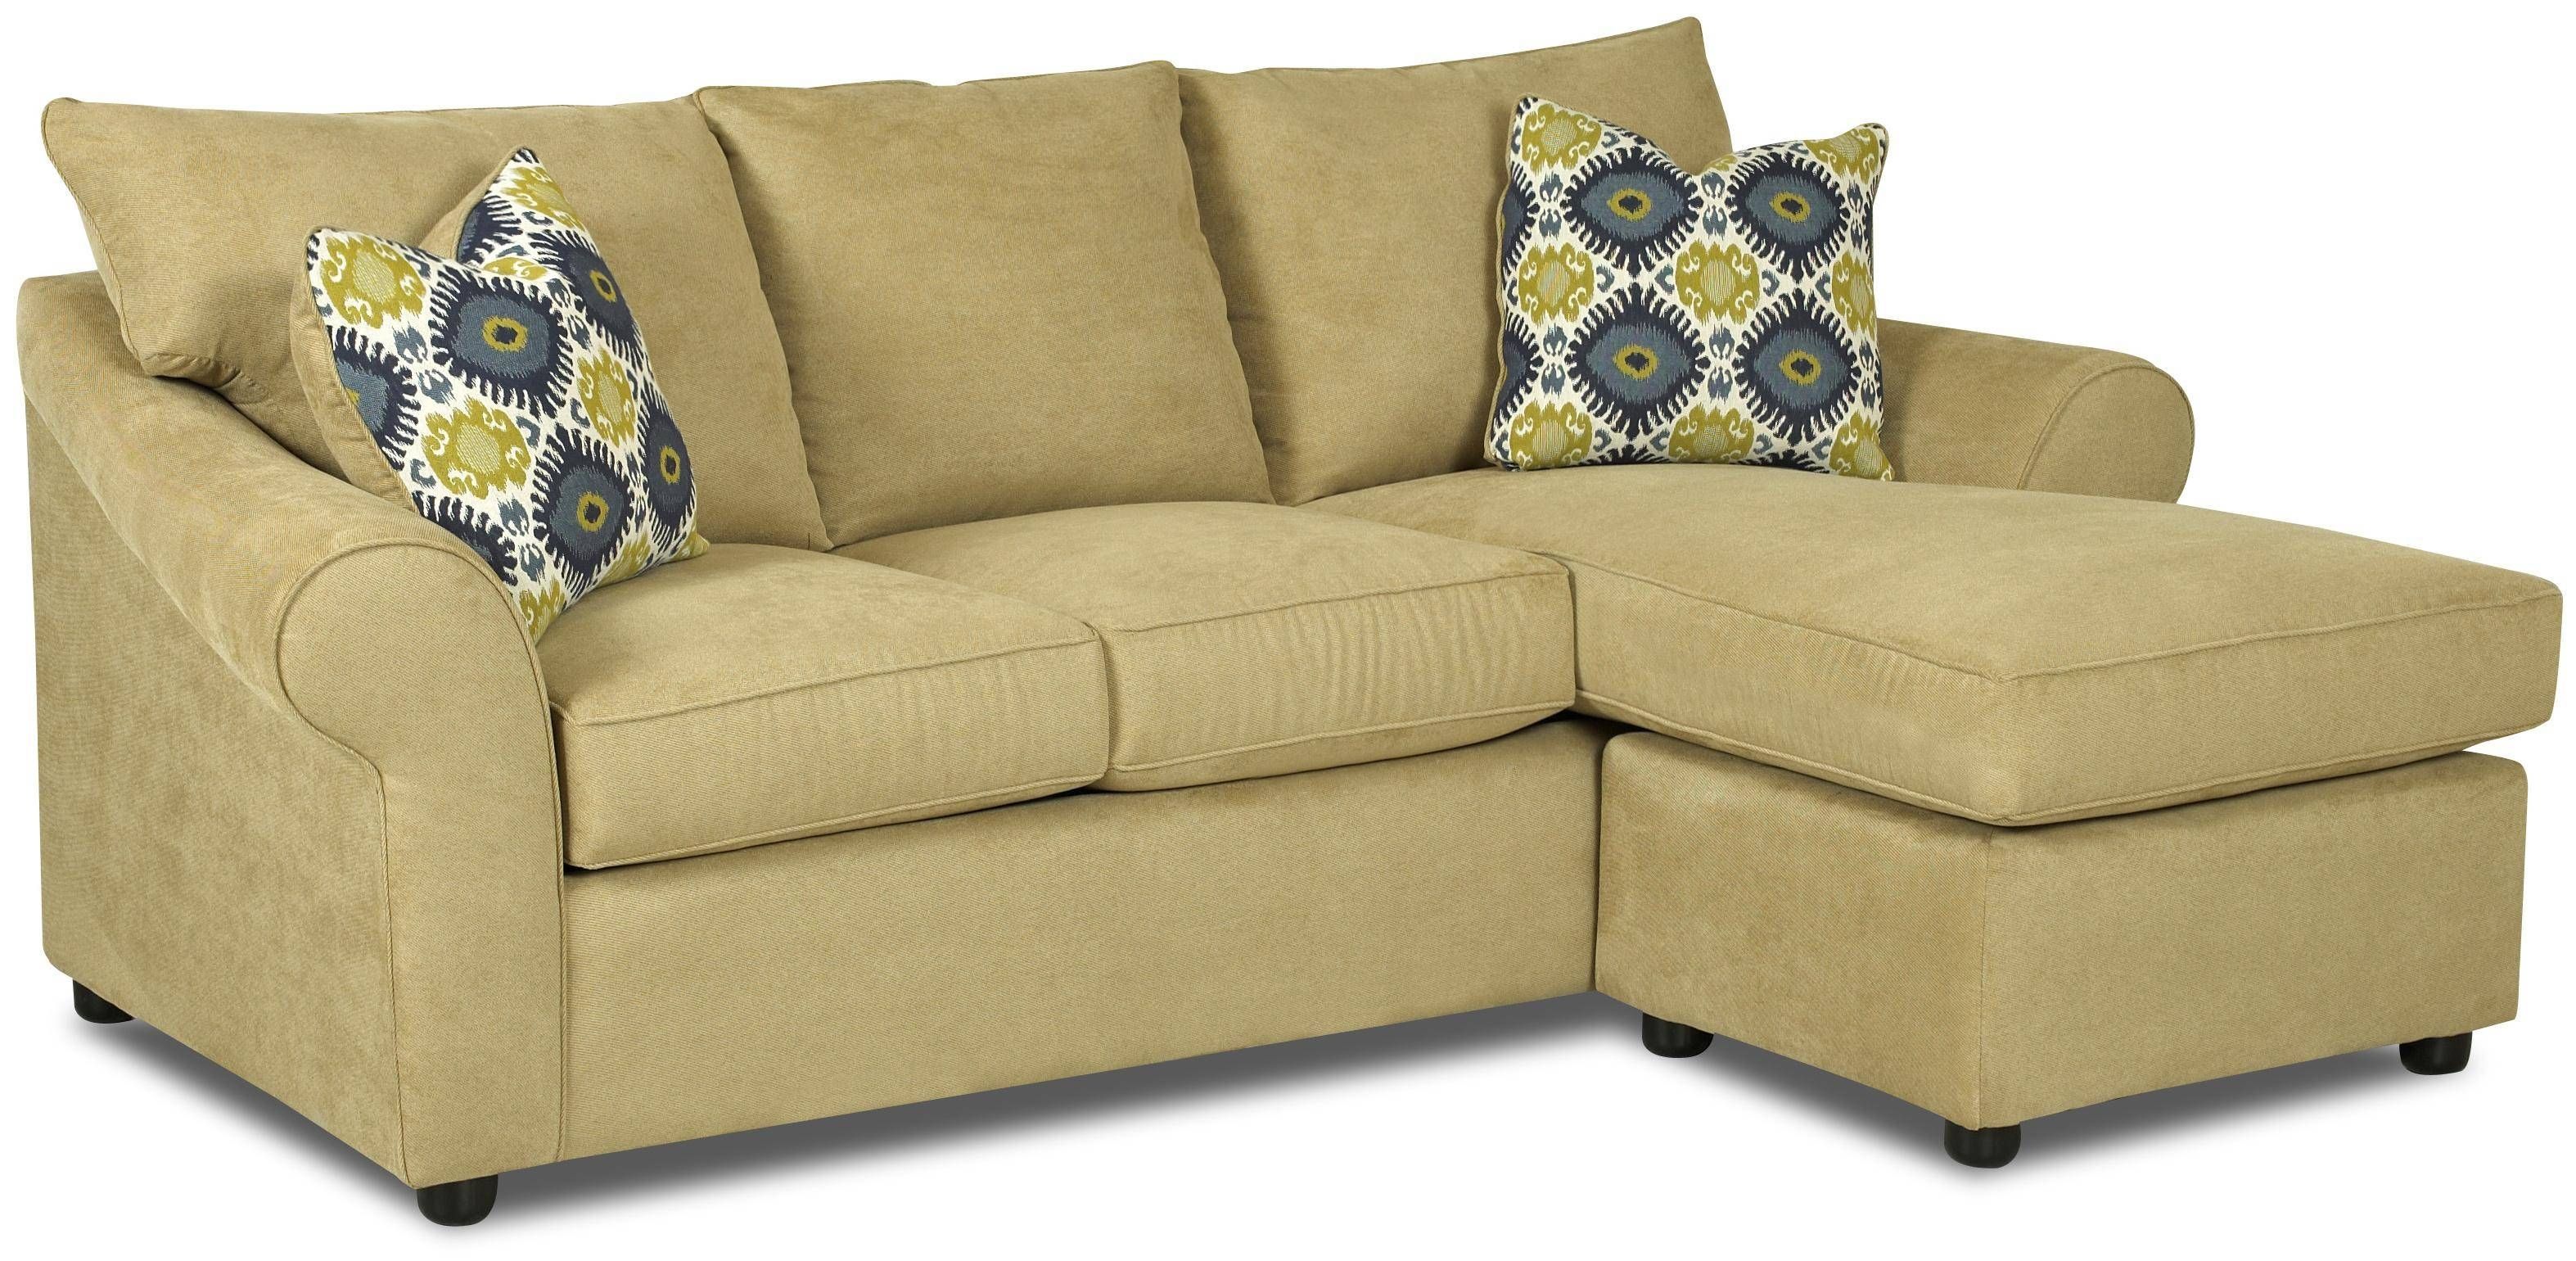 Chaise Lounge Sofa – Helpformycredit Inside Sofas With Chaise Longue (View 1 of 30)